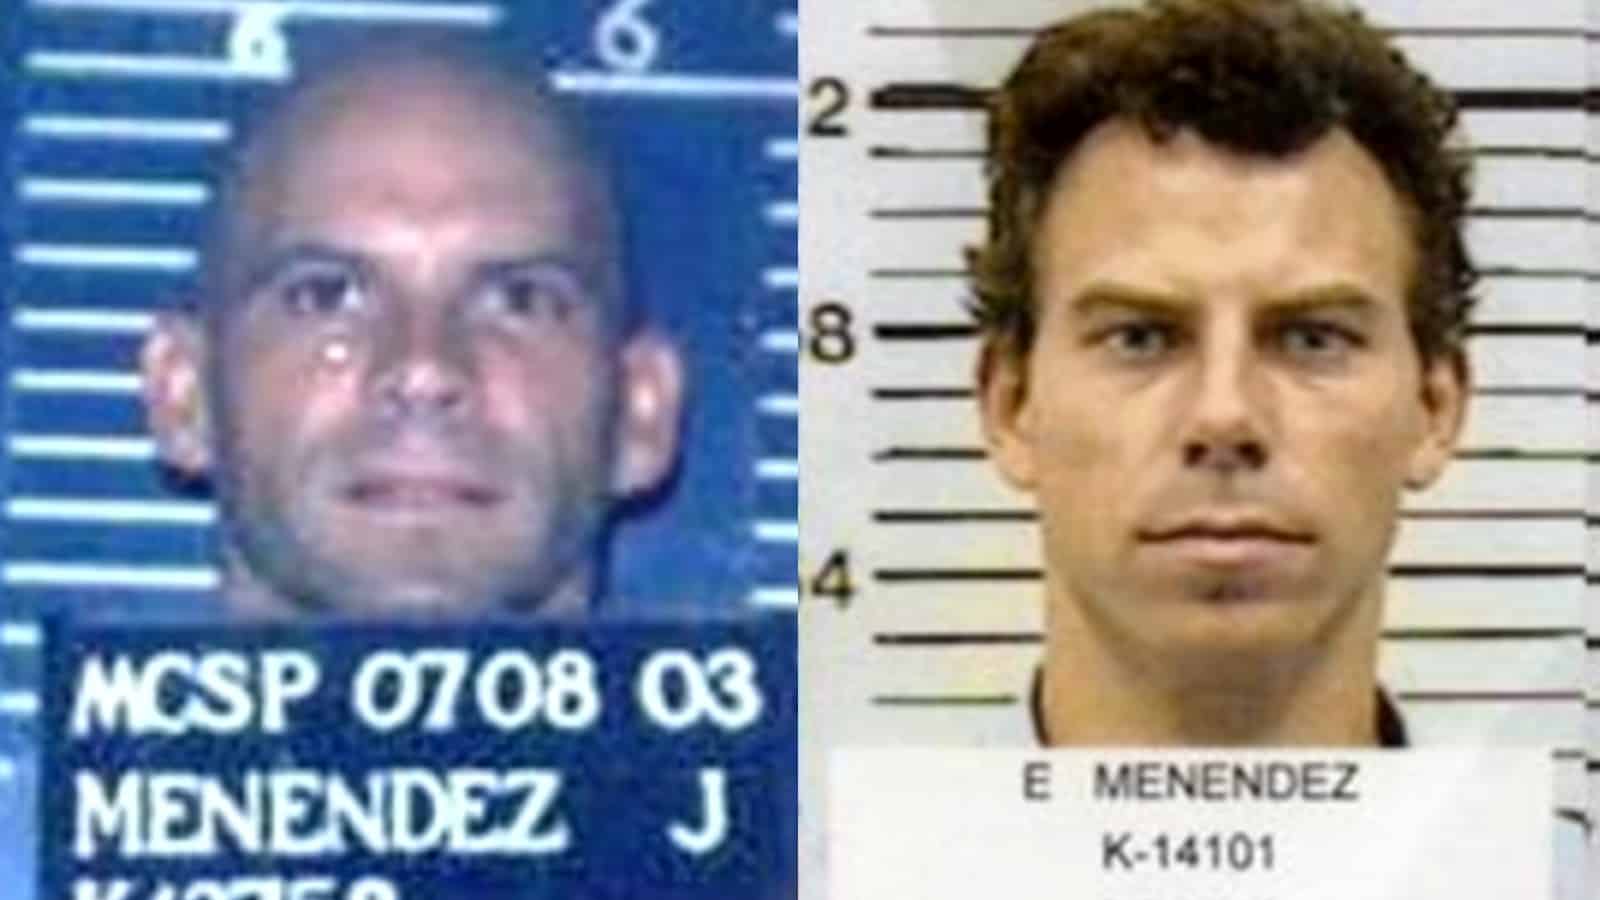 Menendez brothers in their mugshots